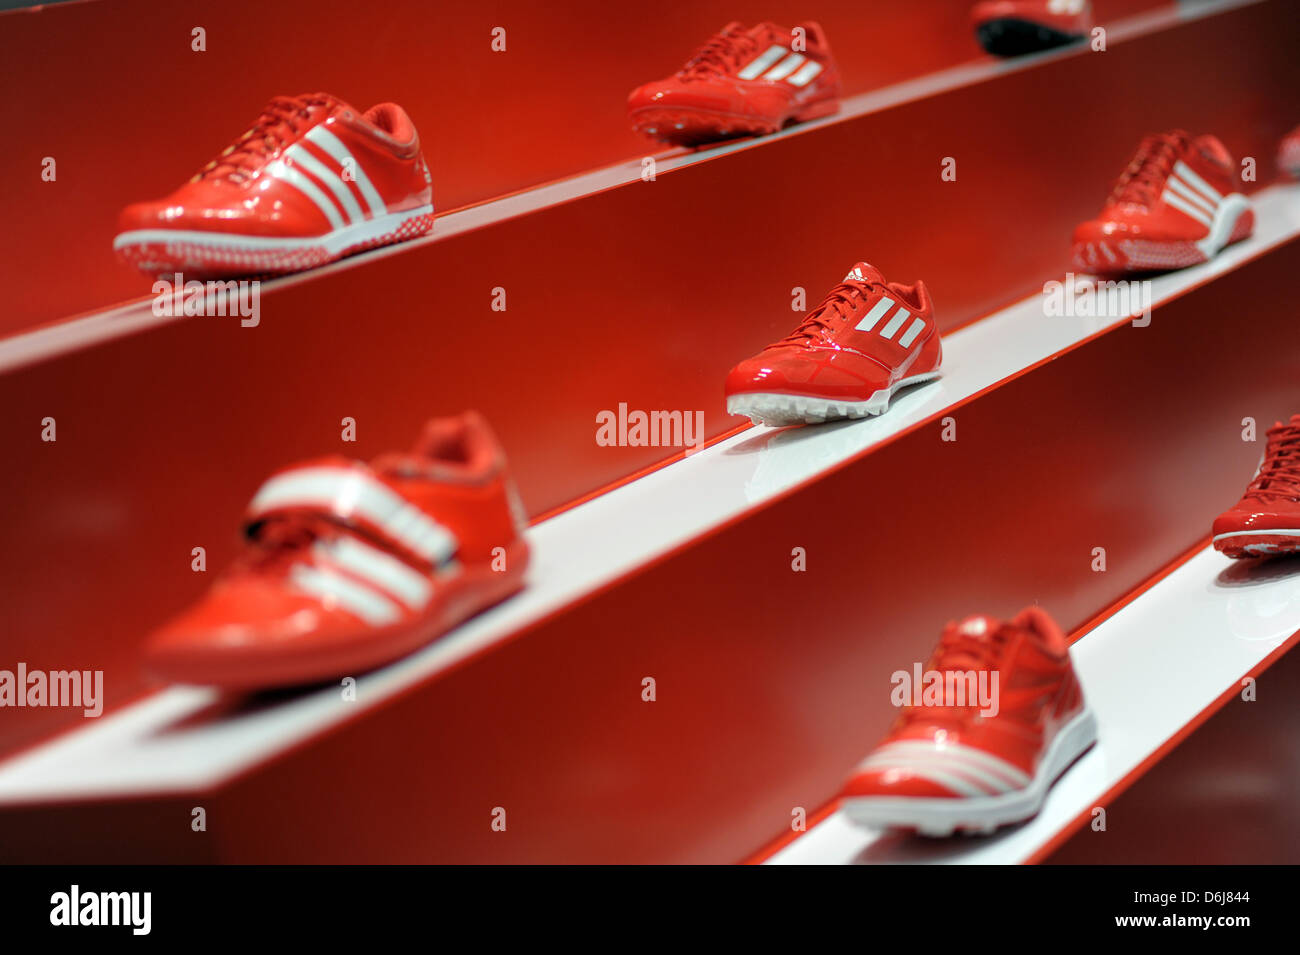 Red adidas soccer shoes are on display during a press conference on the  company's annual results in Herzogenaurach, Germany, 07 March 2012. The  sports goods business is booming, and adidas is reaping